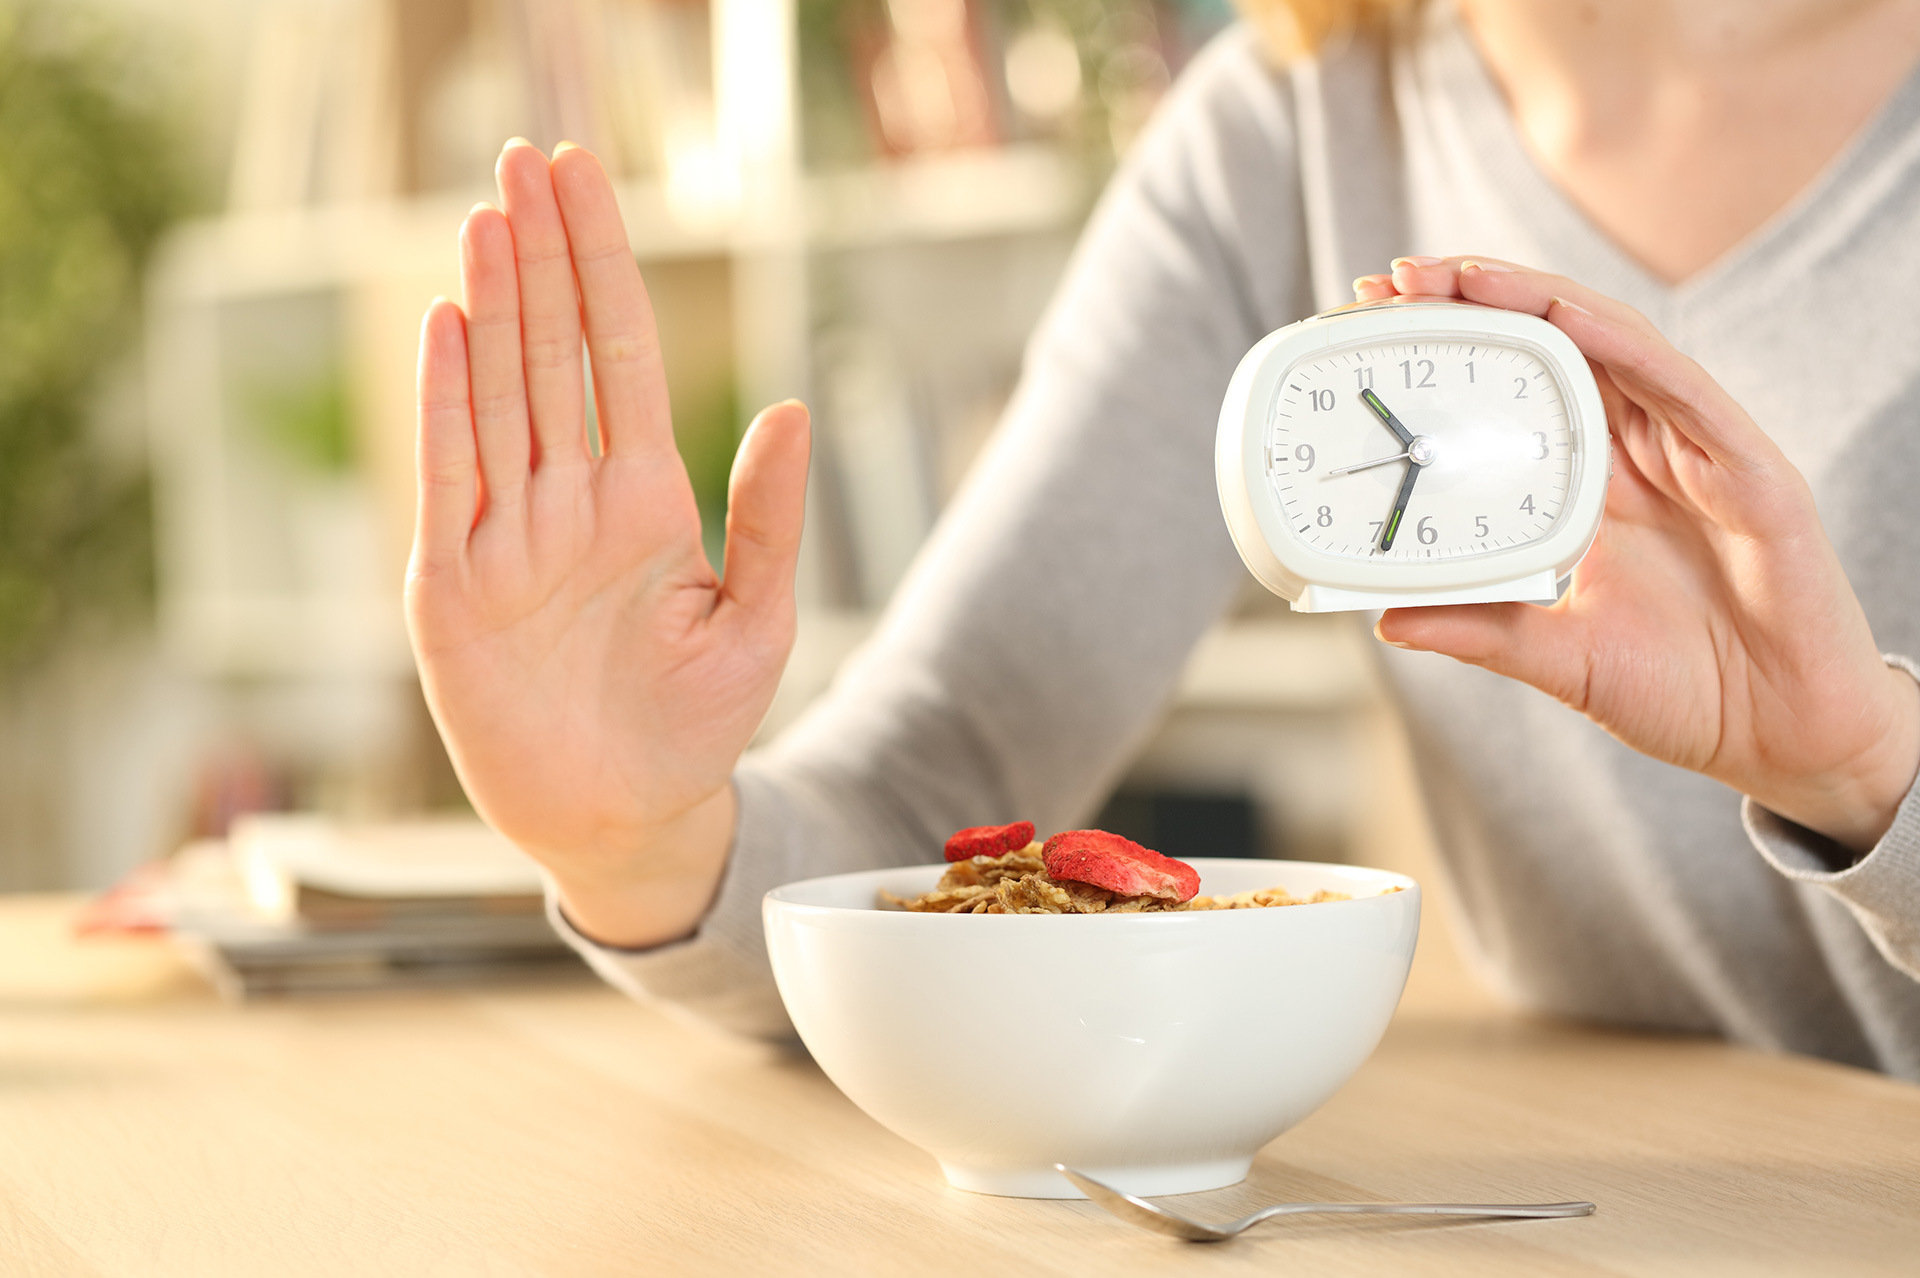 Why Intermittent Fasting Boosts the Body’s Recycling Process